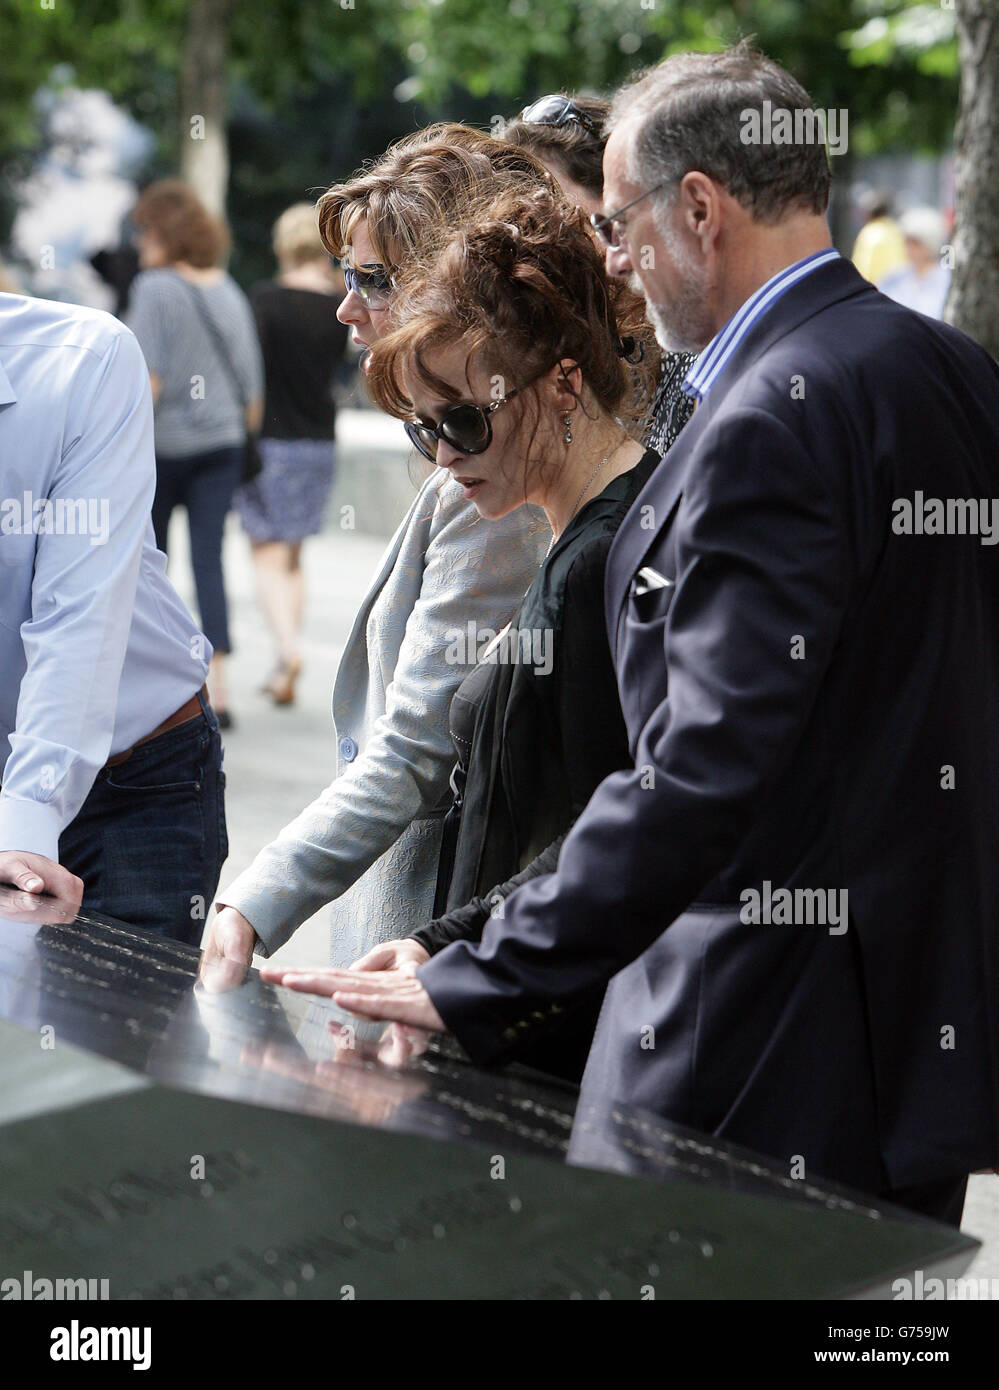 Members of the Prime Minister's Holocaust Commission (from left) Natasha Kaplinsky, Helena Bonham Carter and Mick Davis during a visit to the 9/11 memorial and Memorial Museum in New York, USA. Stock Photo